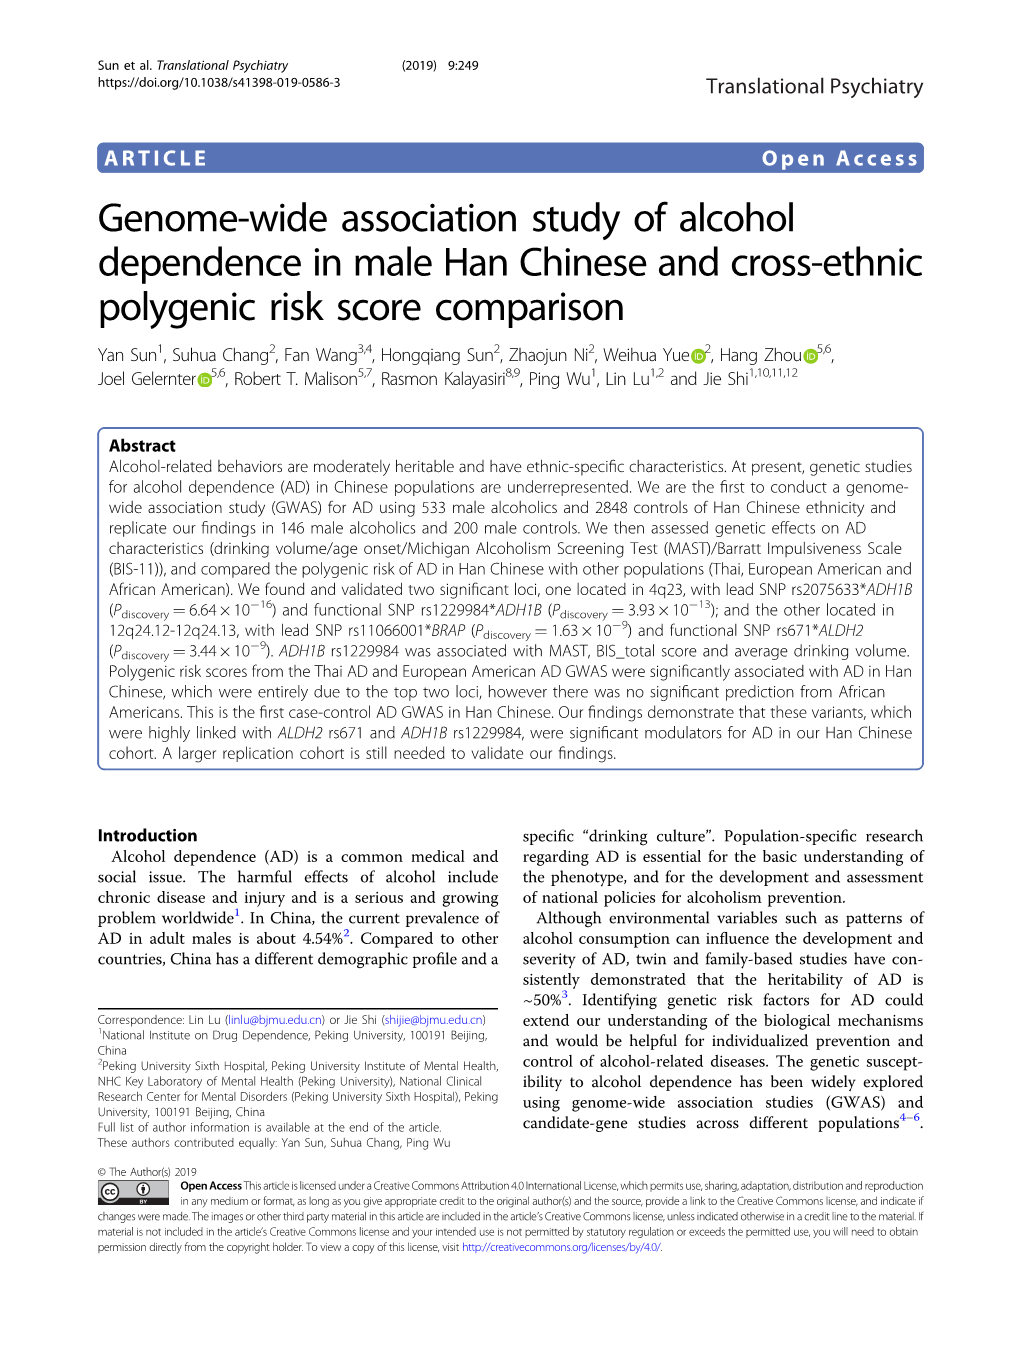 Genome-Wide Association Study of Alcohol Dependence in Male Han